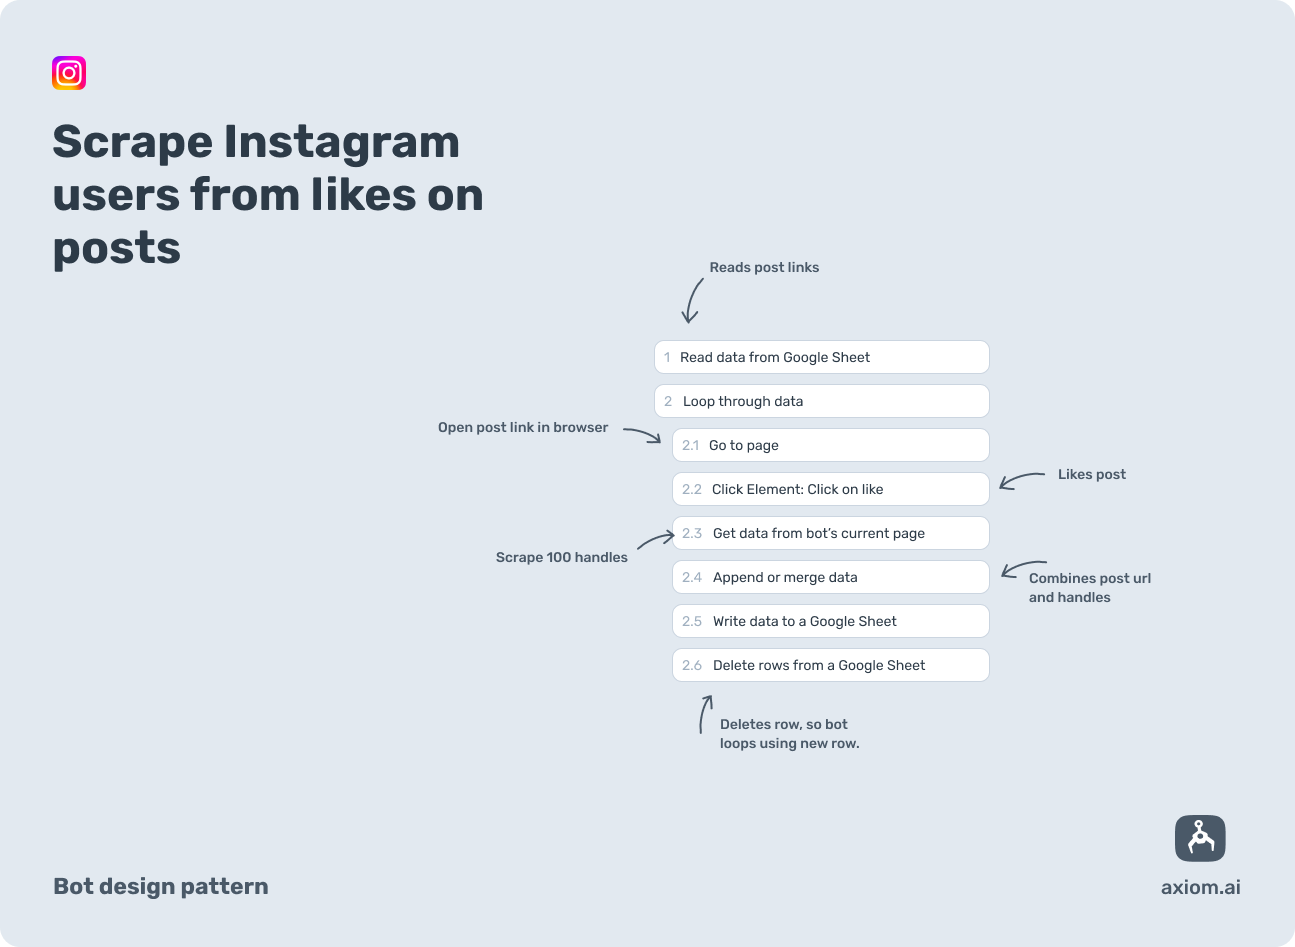 axiom.ai instagram bot that scrapes user handles from likes